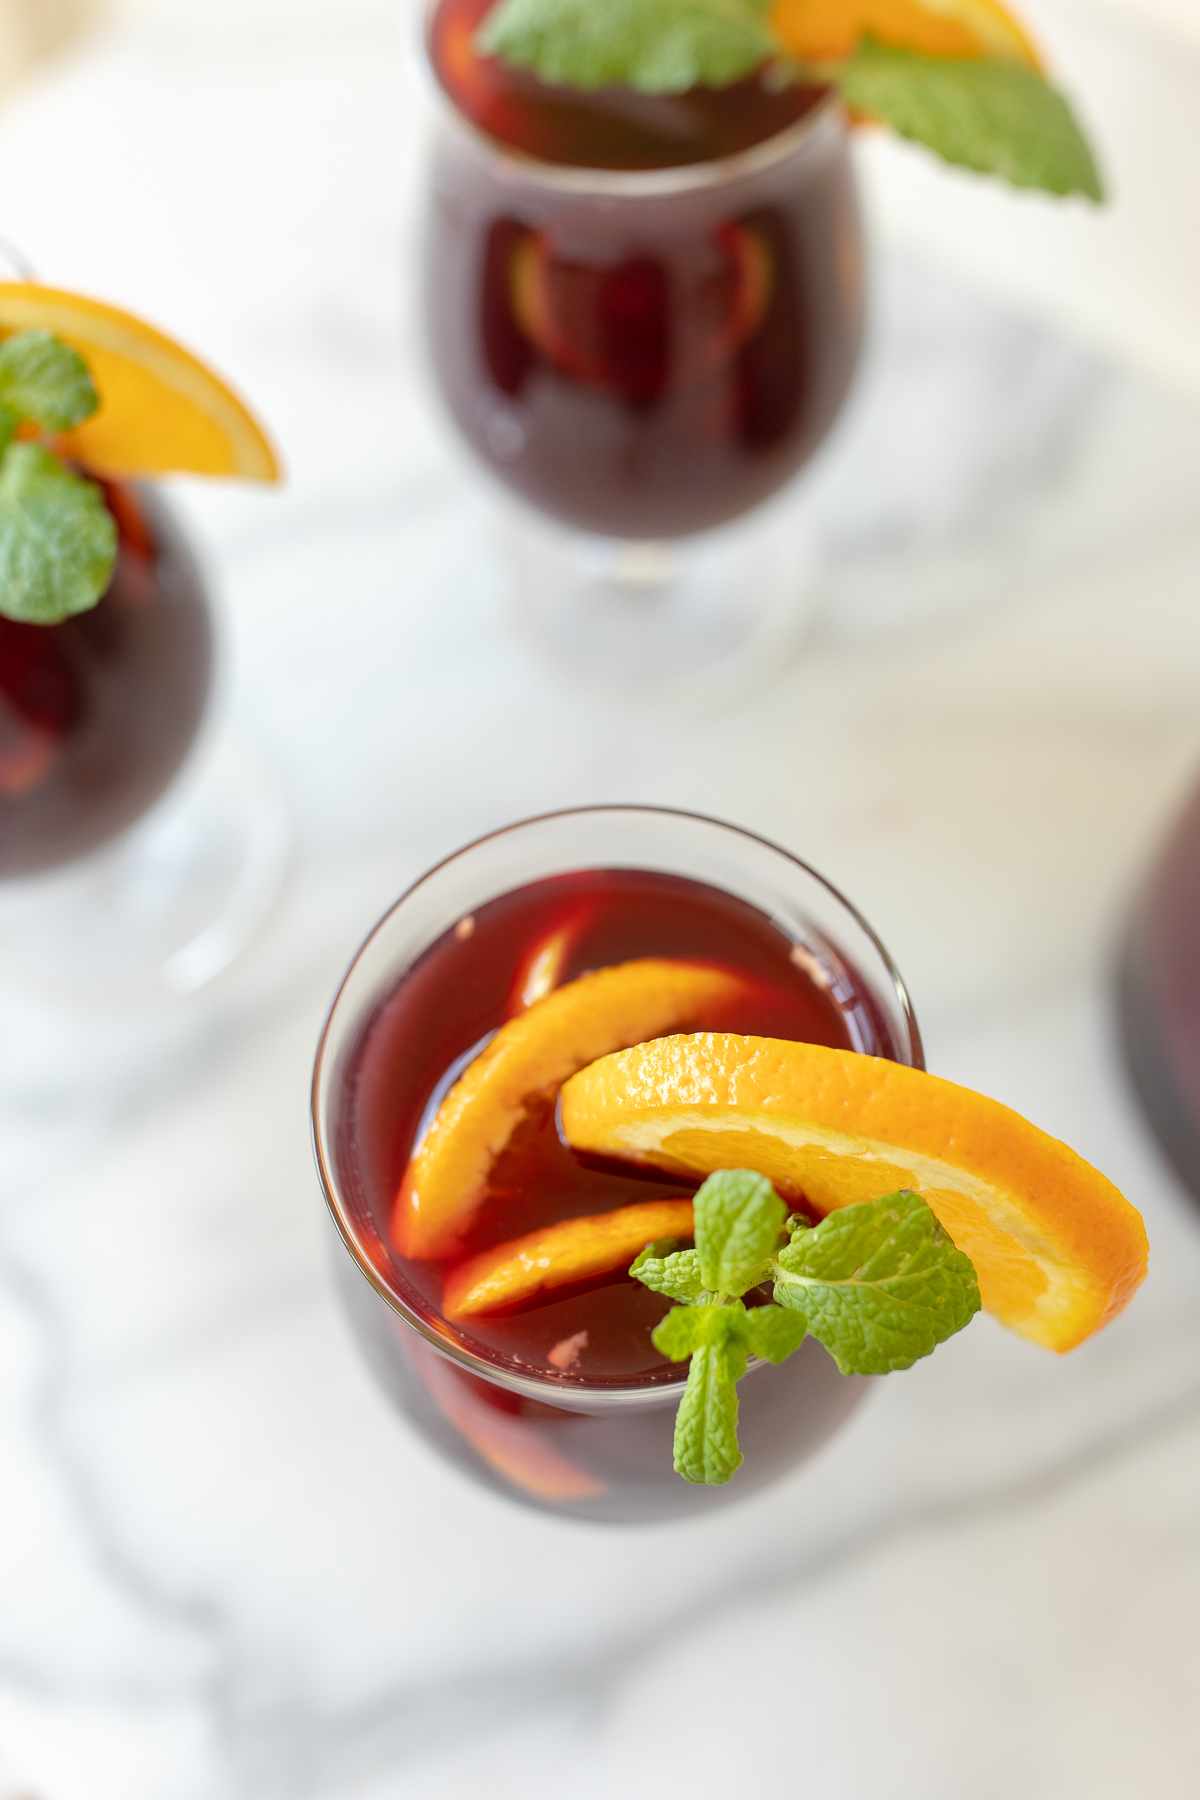 Traditional red sangria in stemware, garnished with fresh mint and orange slices.